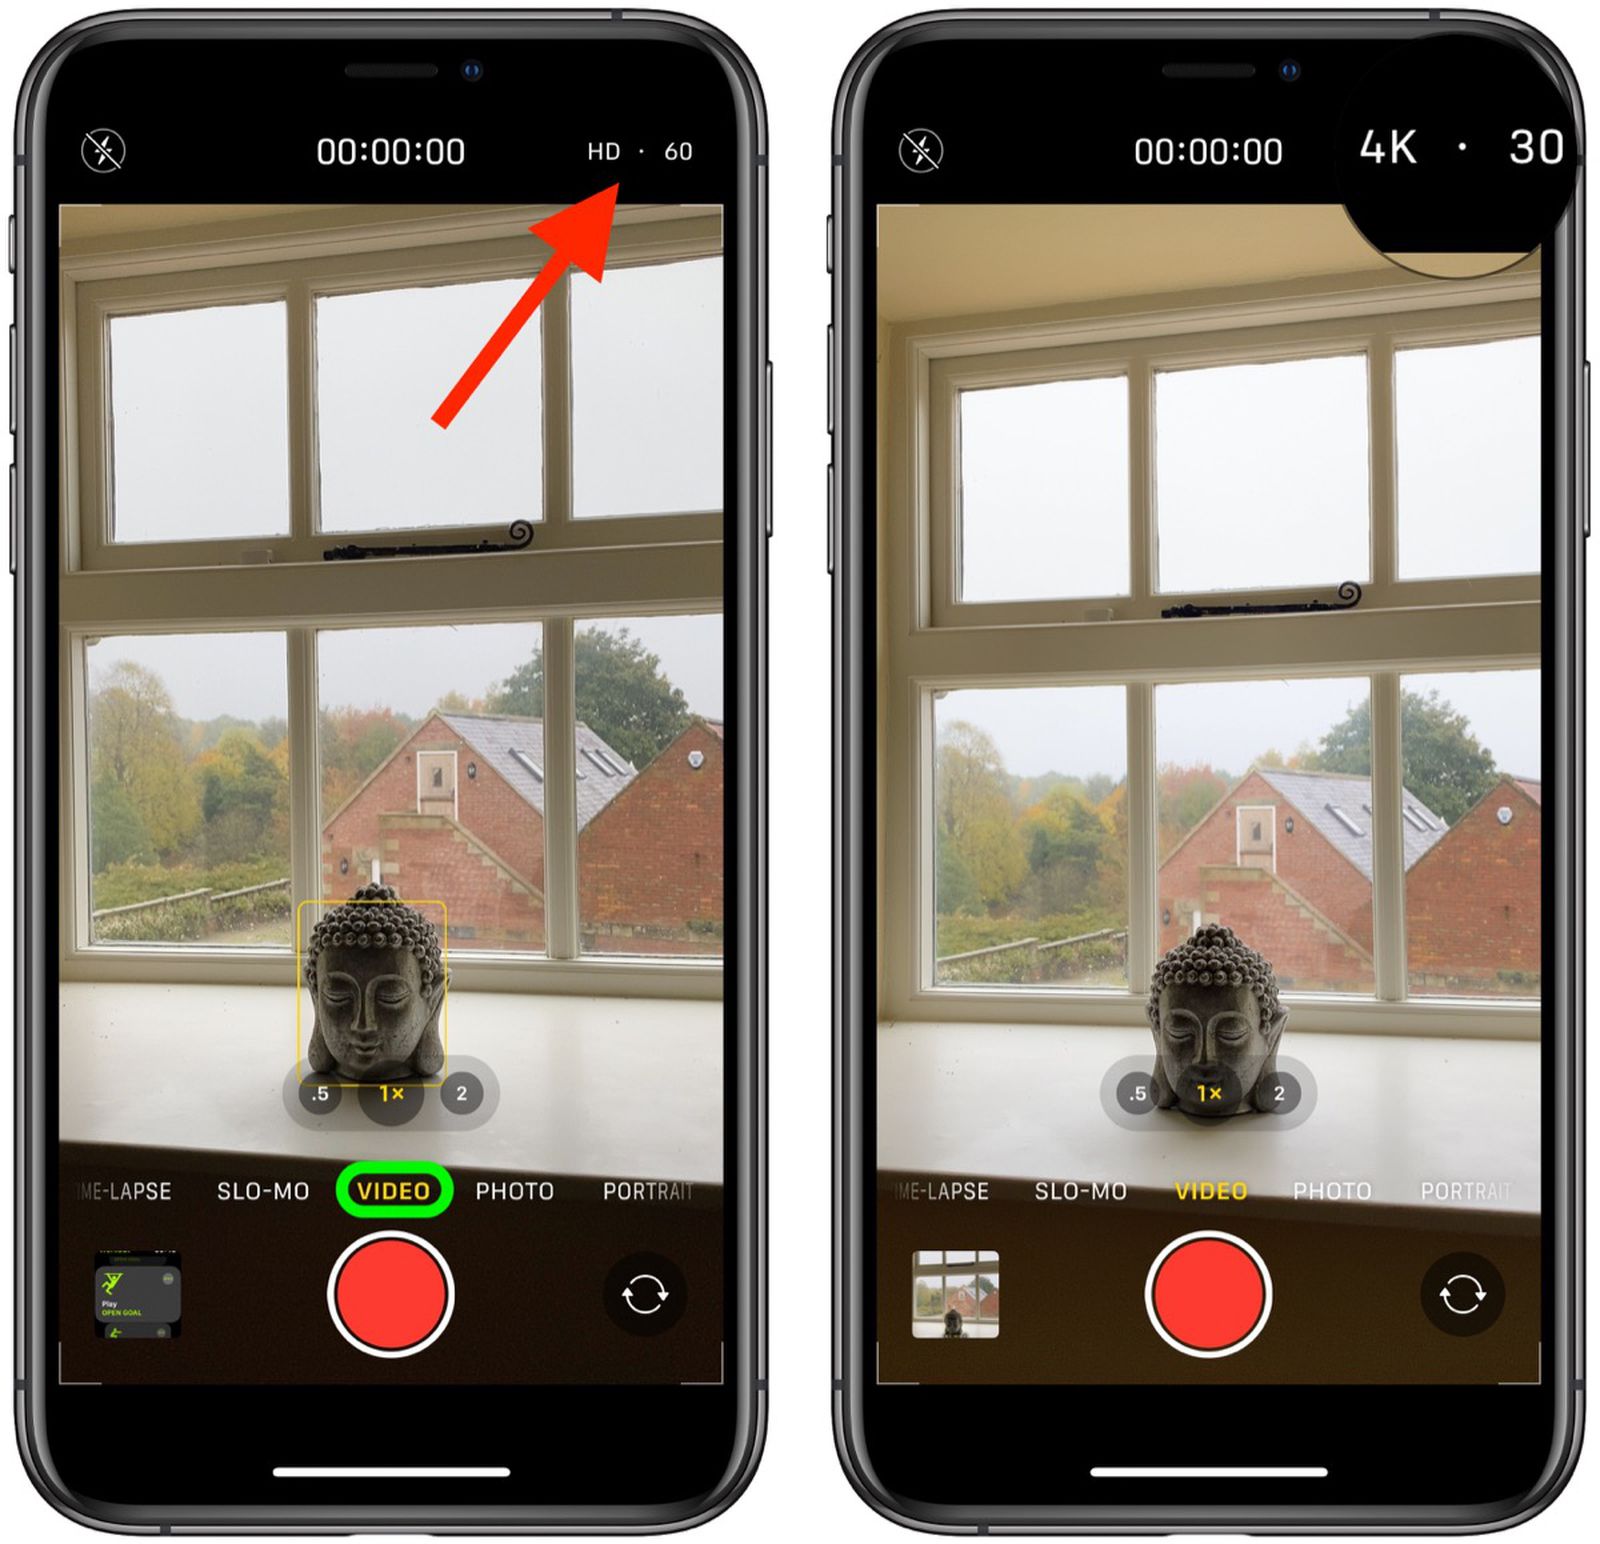 Criminal Them Almost iOS 14: How to Change Video Quality in the Camera App - MacRumors